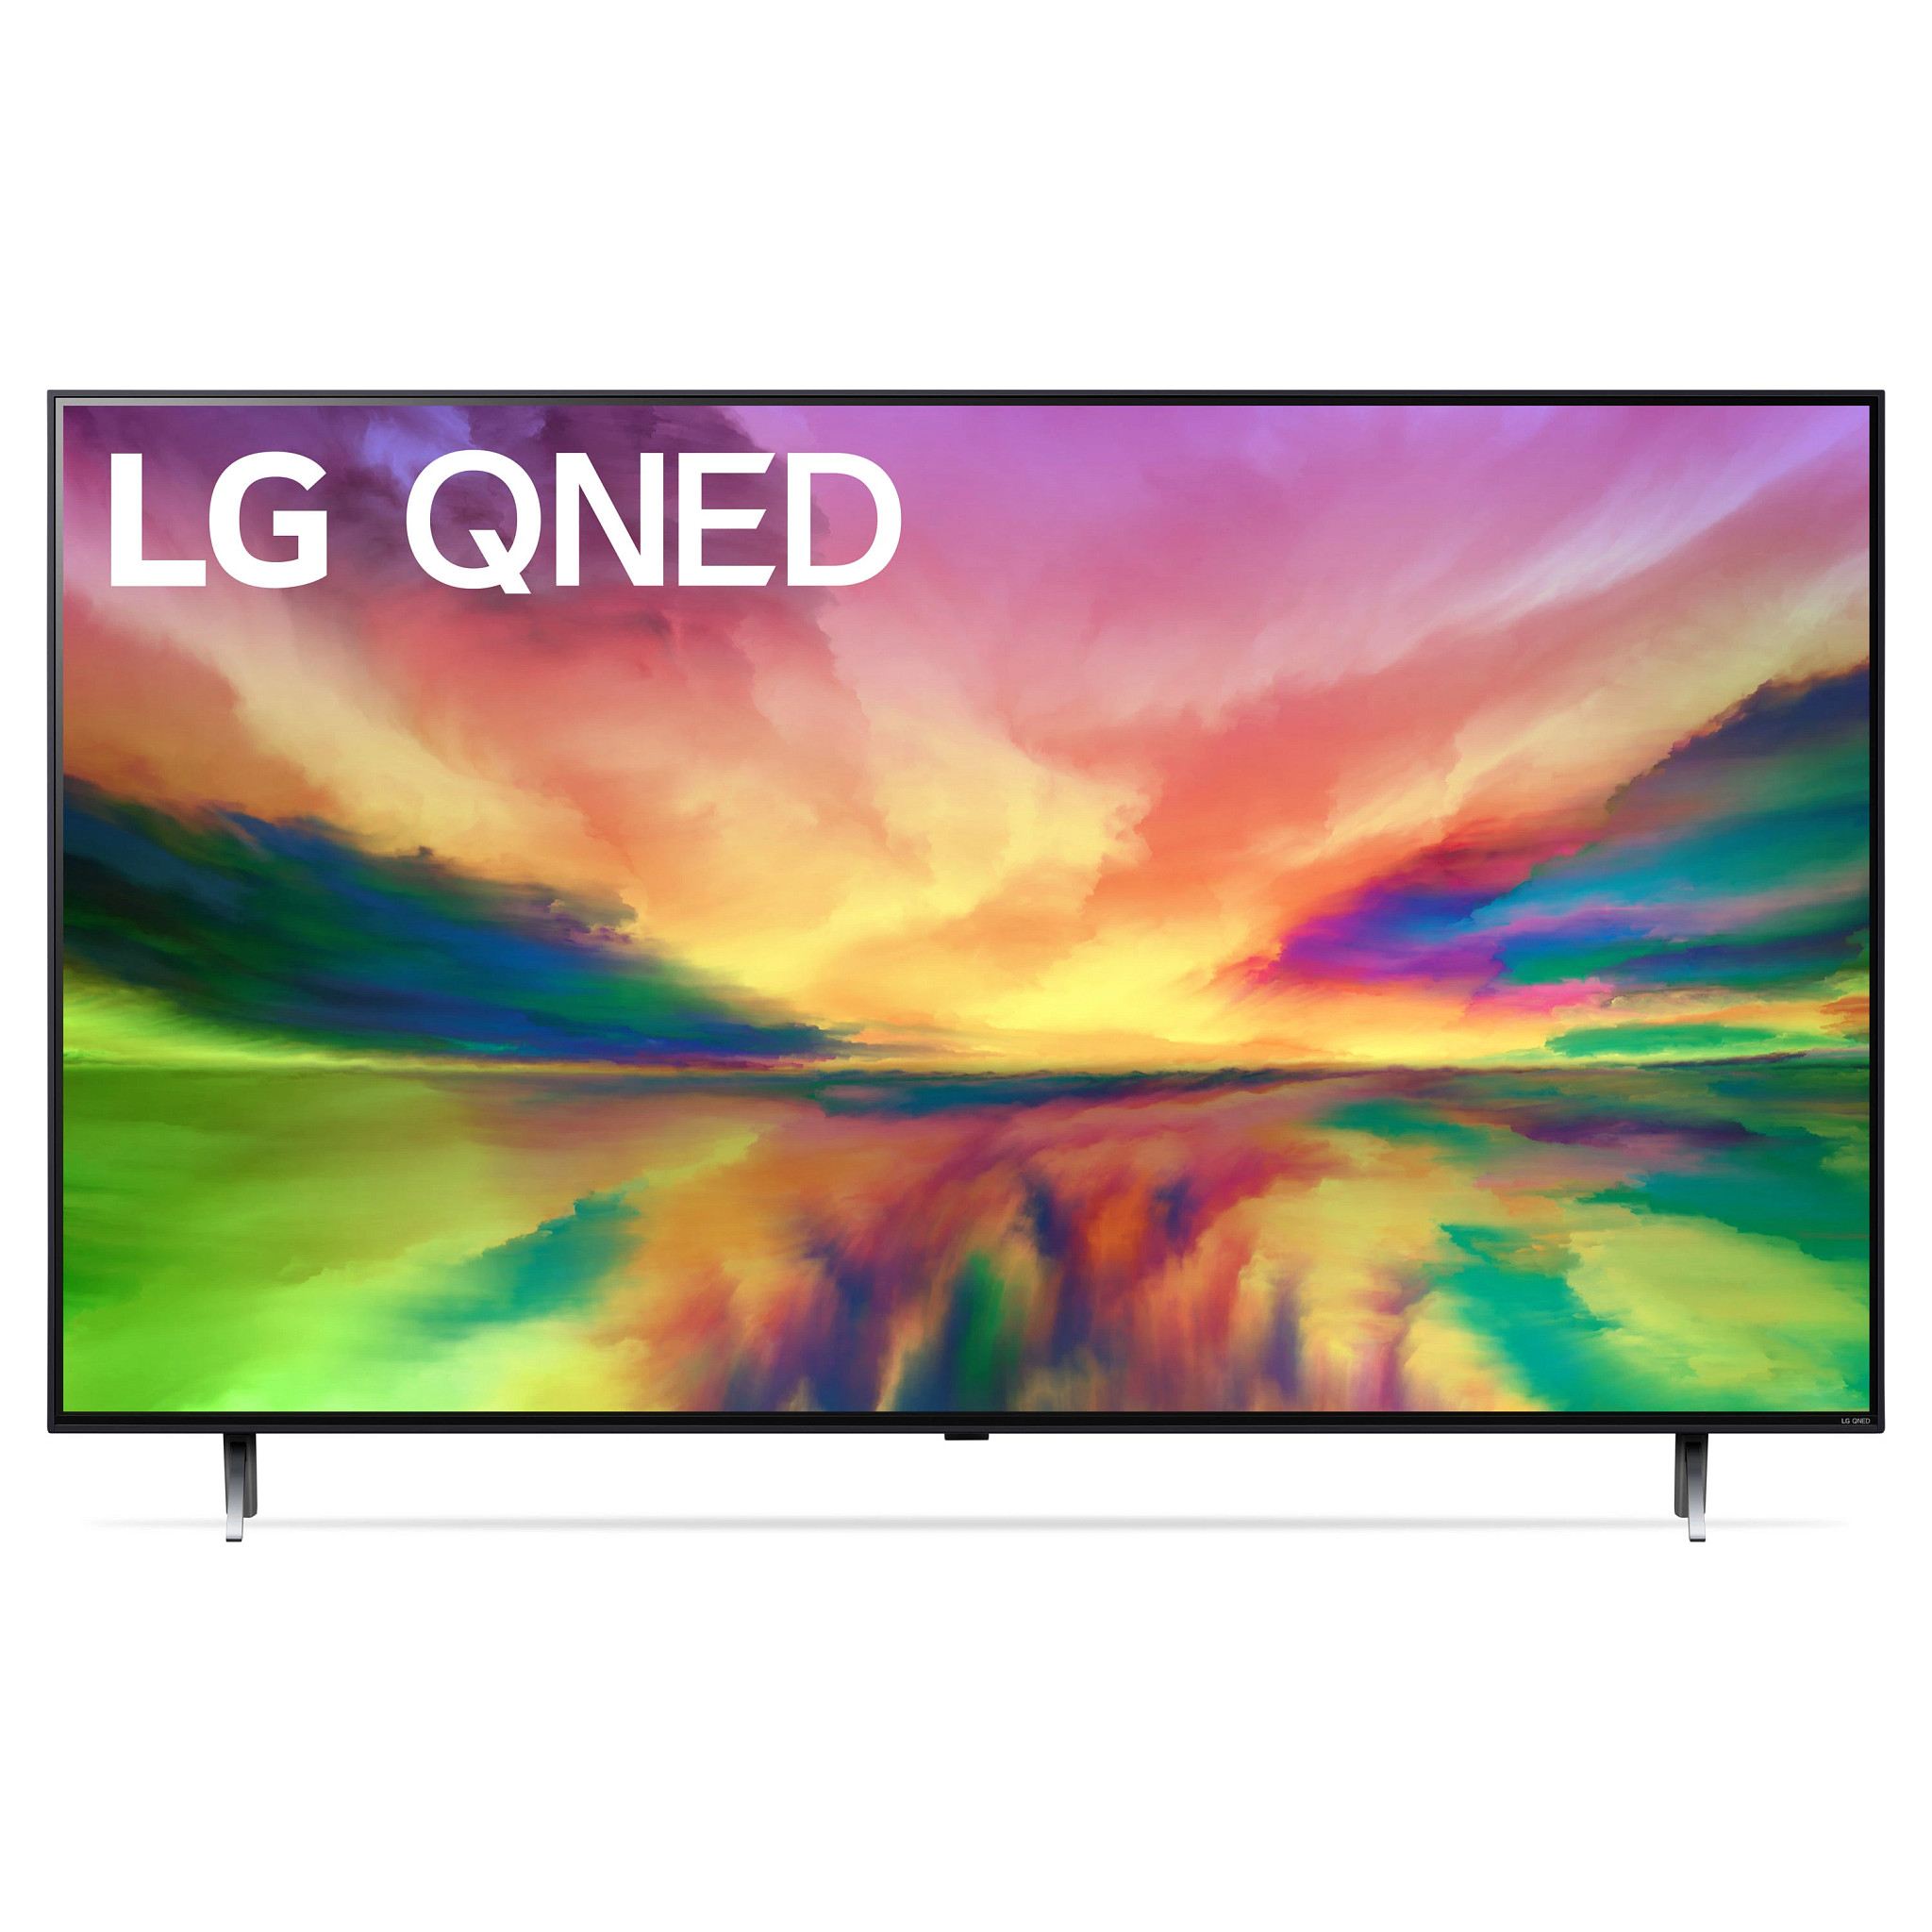 LG 75" Class QNED80 series LED 4K UHD QNED Smart webOS 23 w/ ThinQ AI TV - 75QNED80URA - image 1 of 21